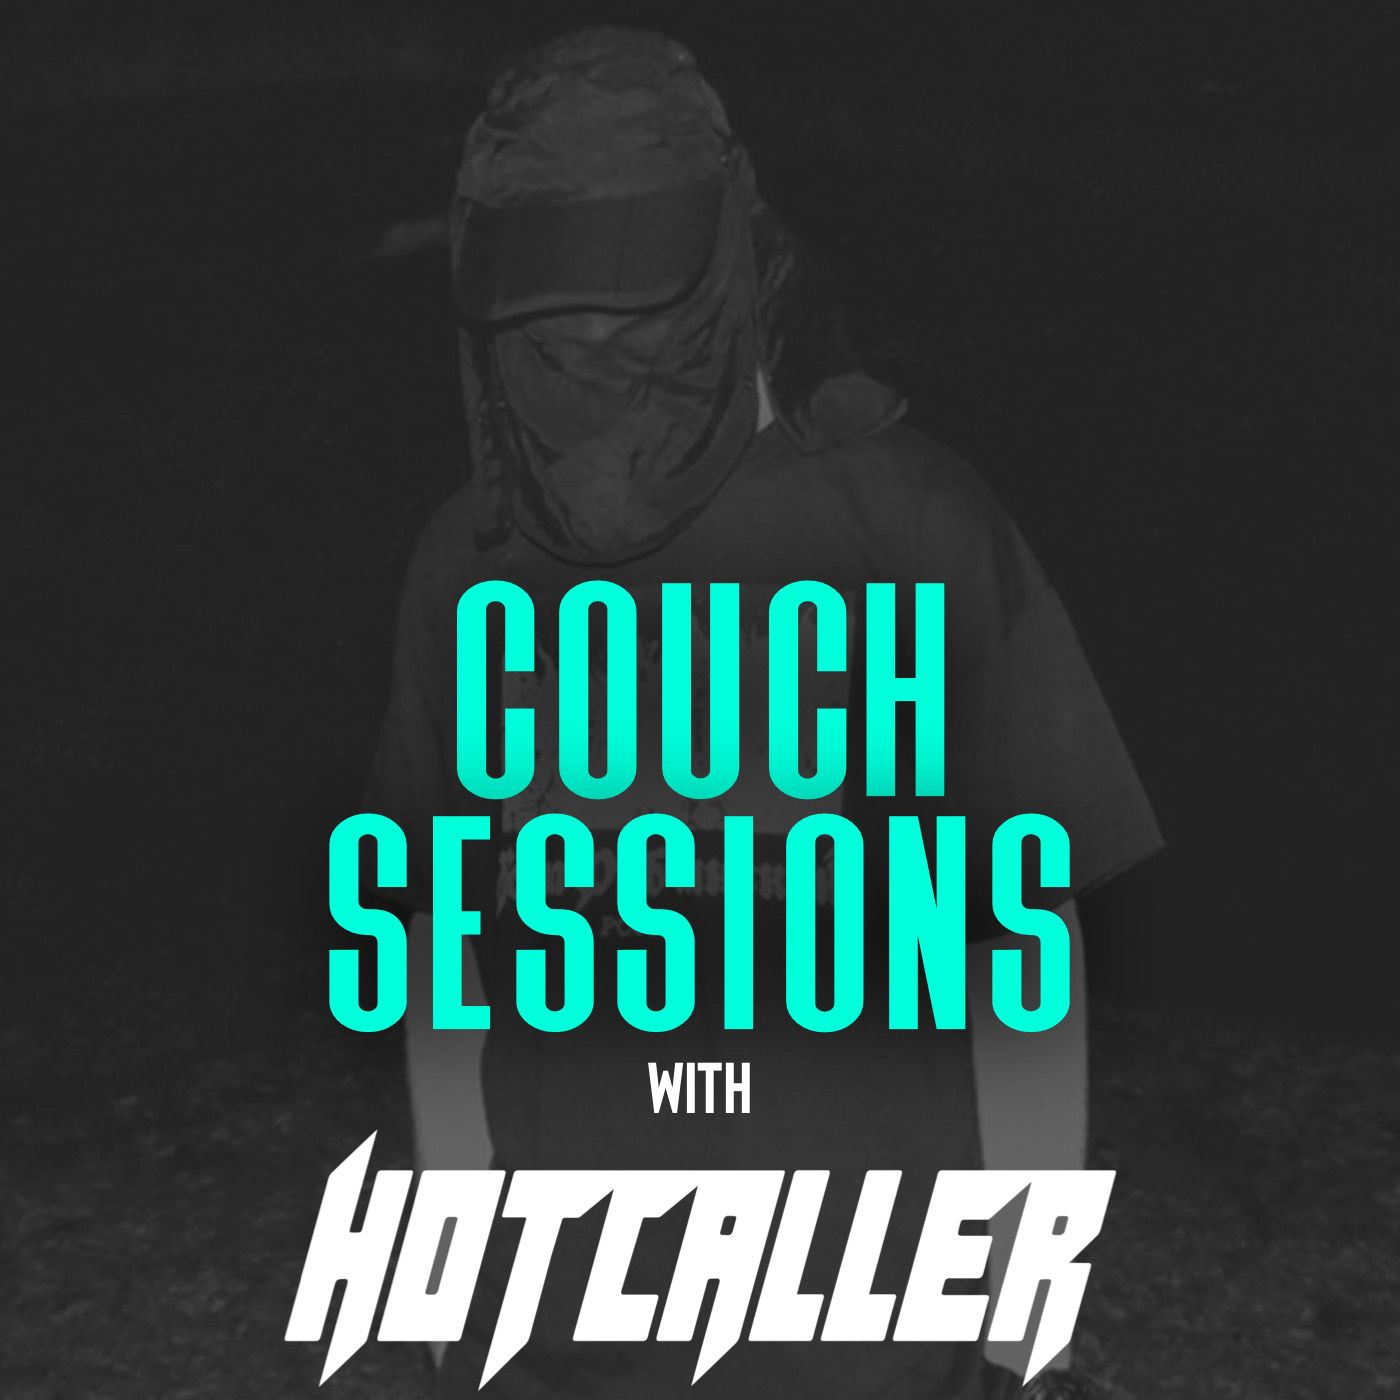 COUCH SESSIONS Episode #23 with Hotcaller